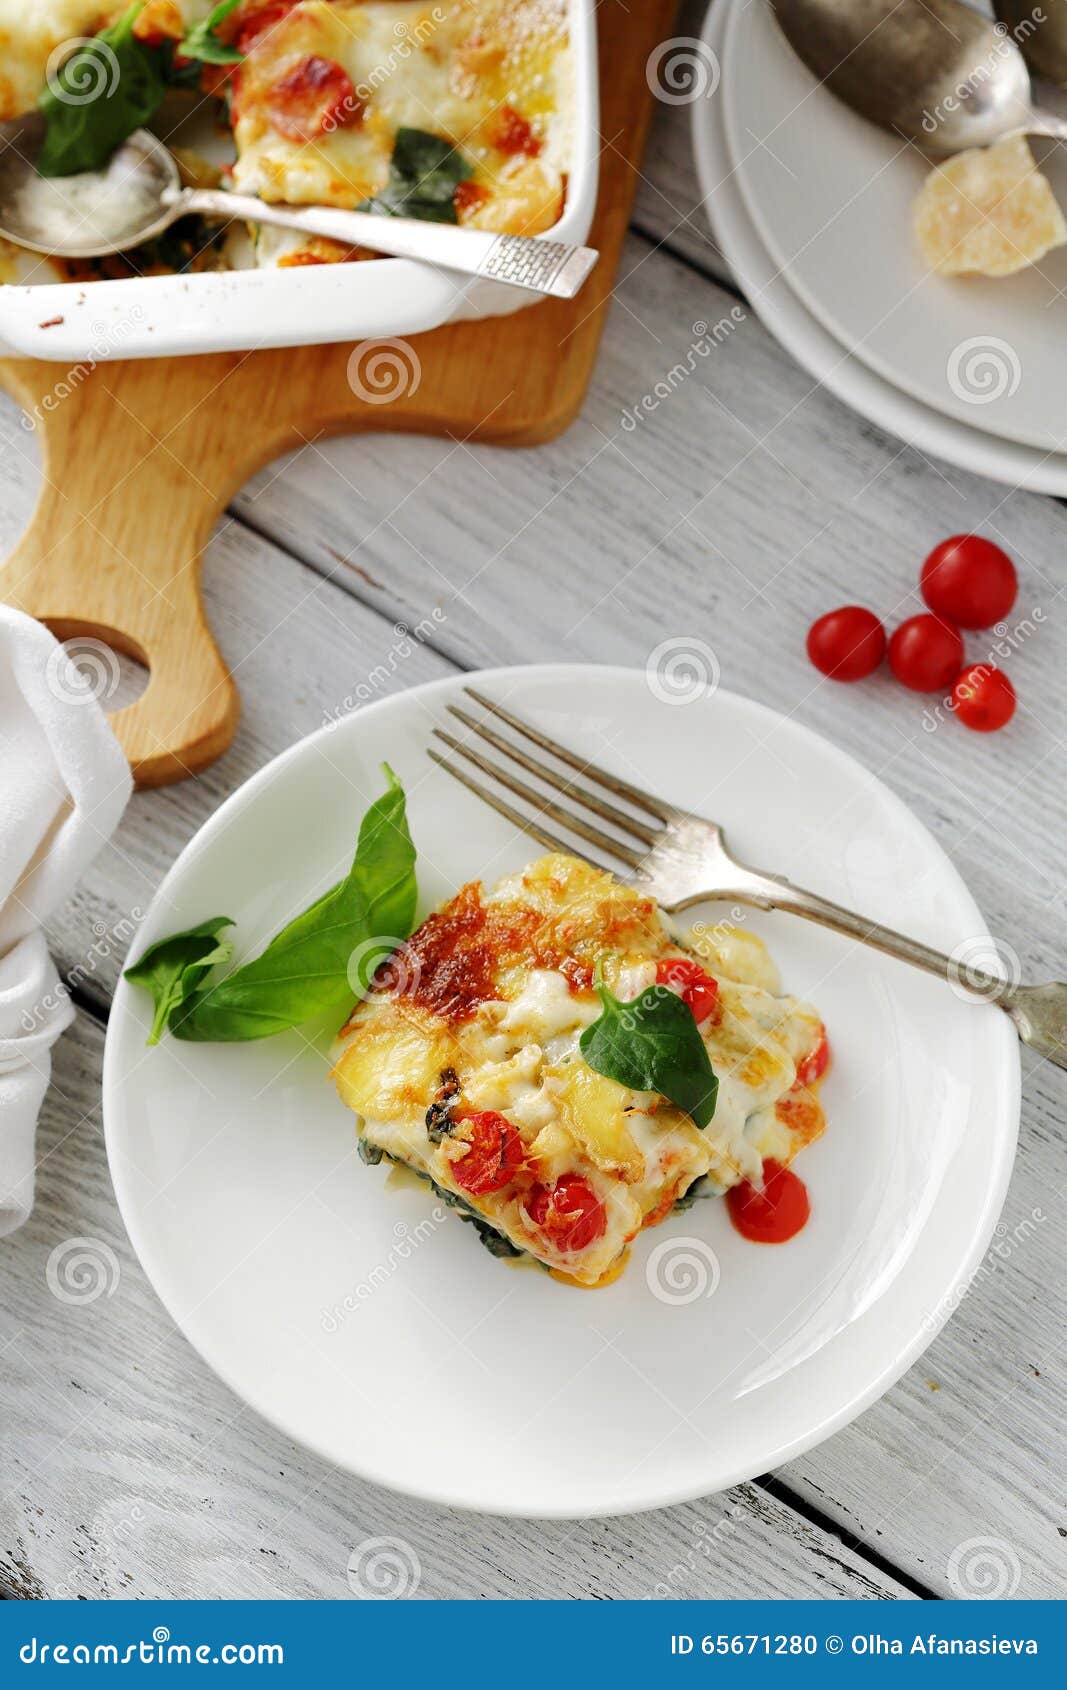 Piece of lasagna on plate stock photo. Image of layer - 65671280